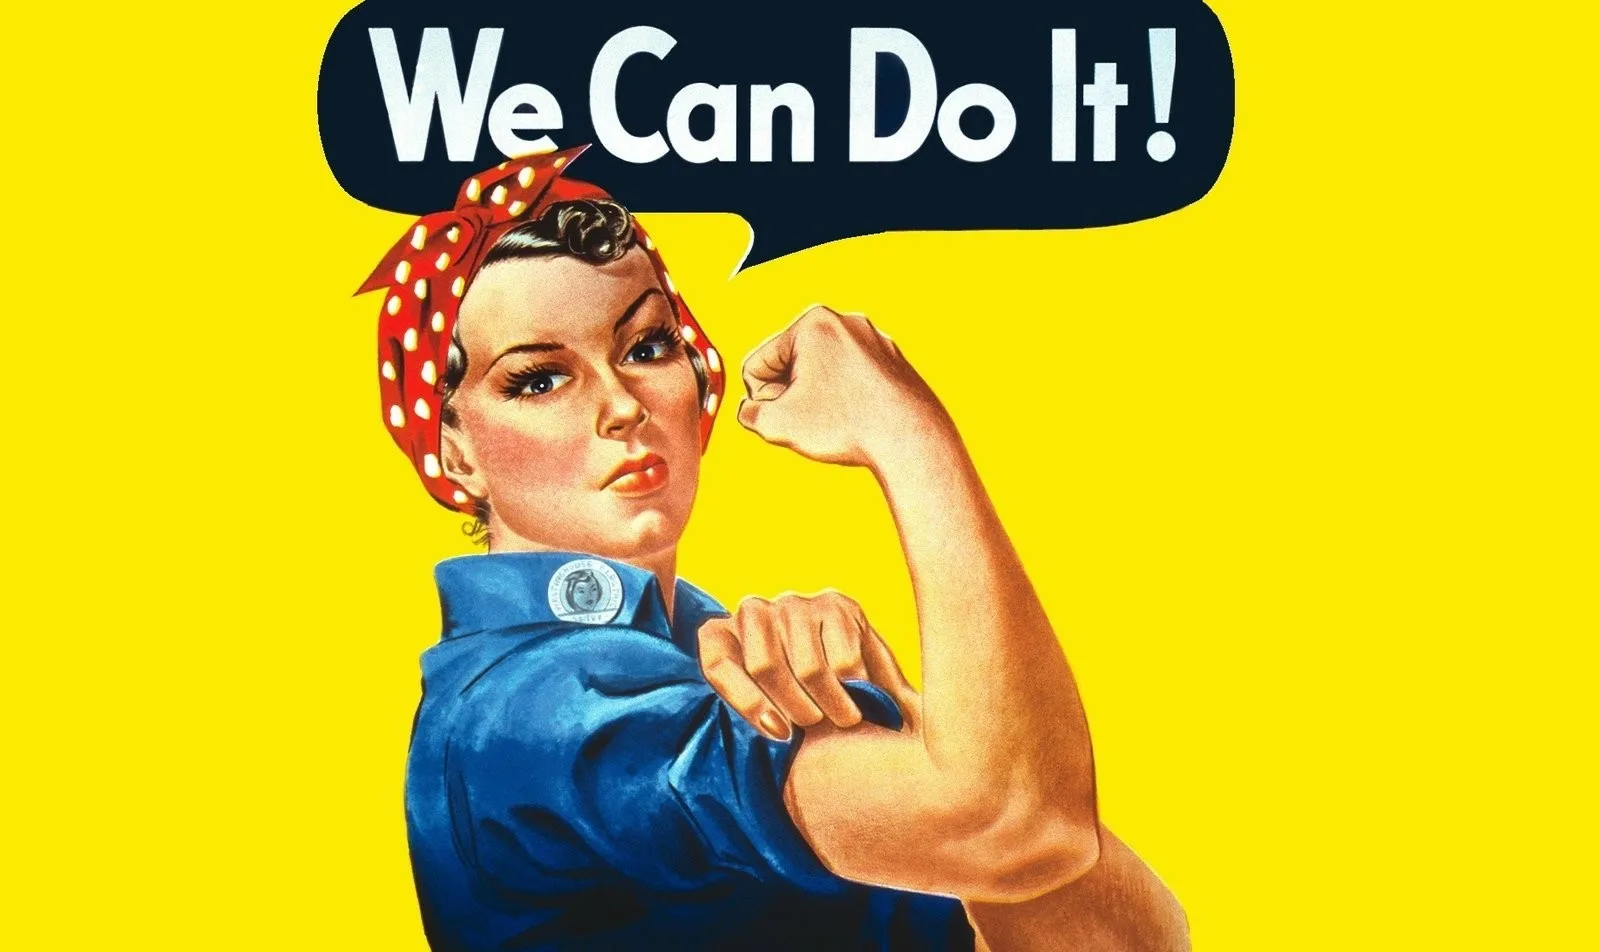 We can make it better. Yes we can do it плакат. Феминизм we can do it. Постер we can do it. You can do it плакат.